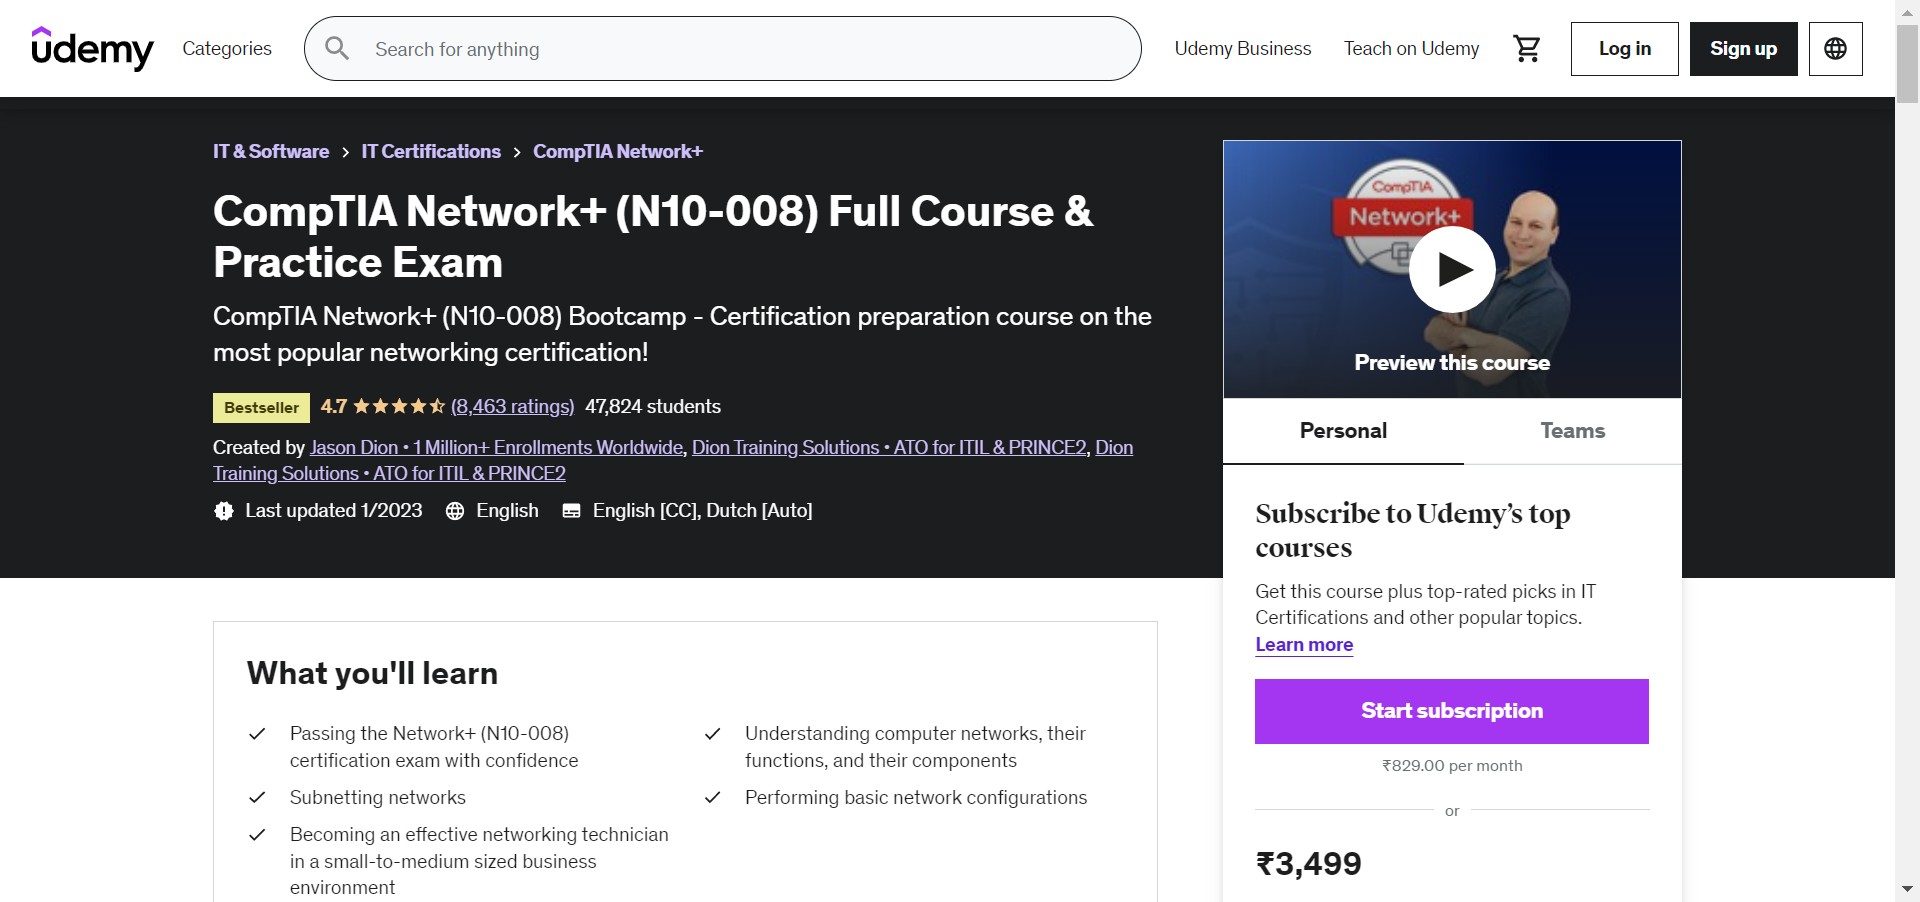 CompTIA Network+(N10-008) Full Course & Practice Exam